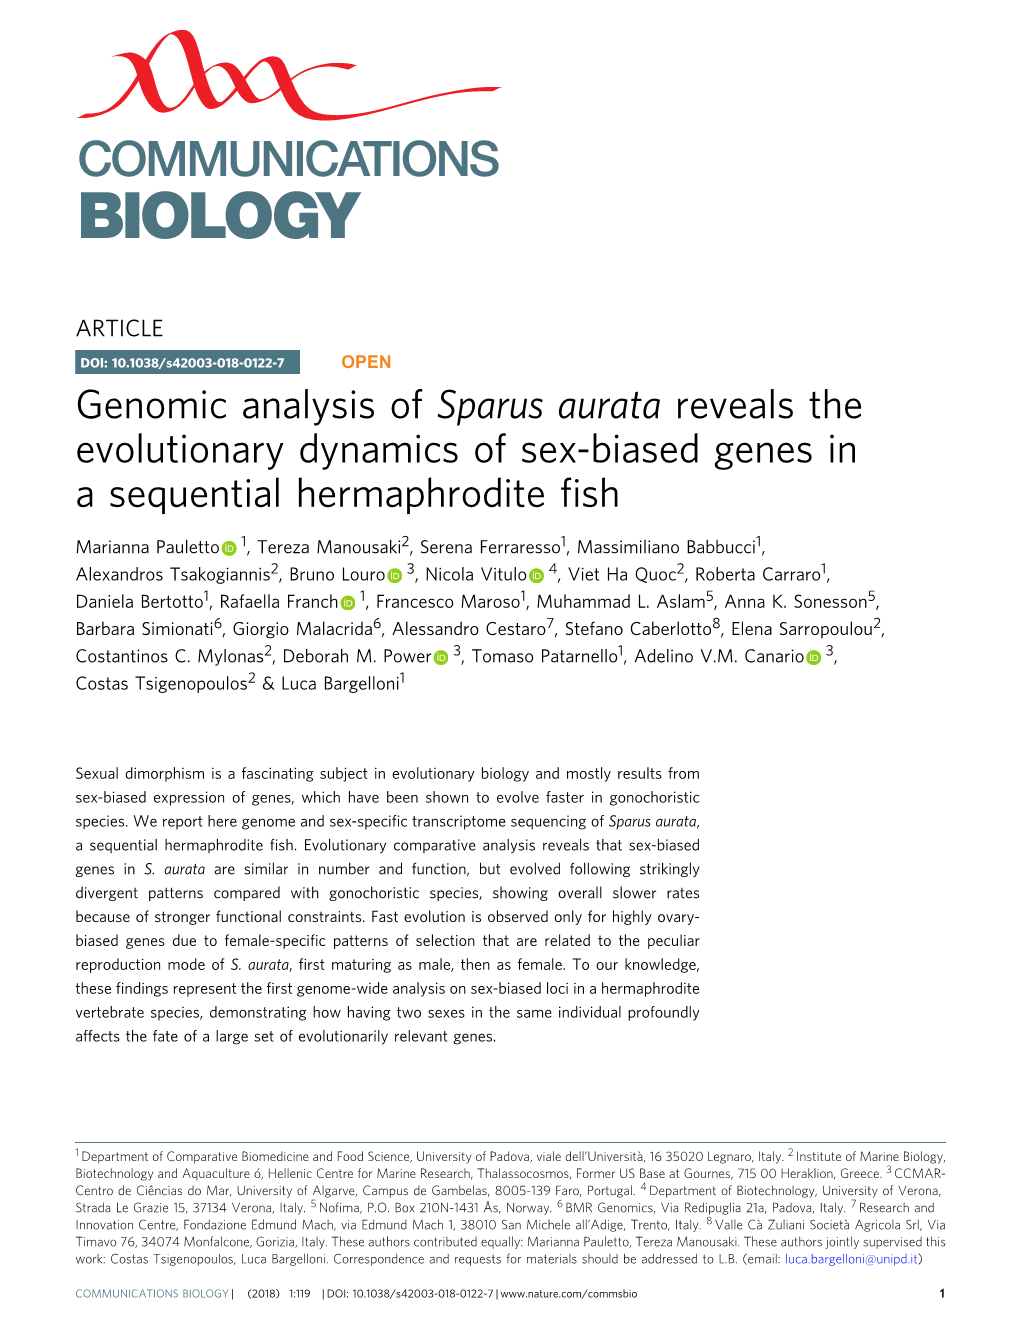 Genomic Analysis of Sparus Aurata Reveals the Evolutionary Dynamics of Sex-Biased Genes in a Sequential Hermaphrodite ﬁsh